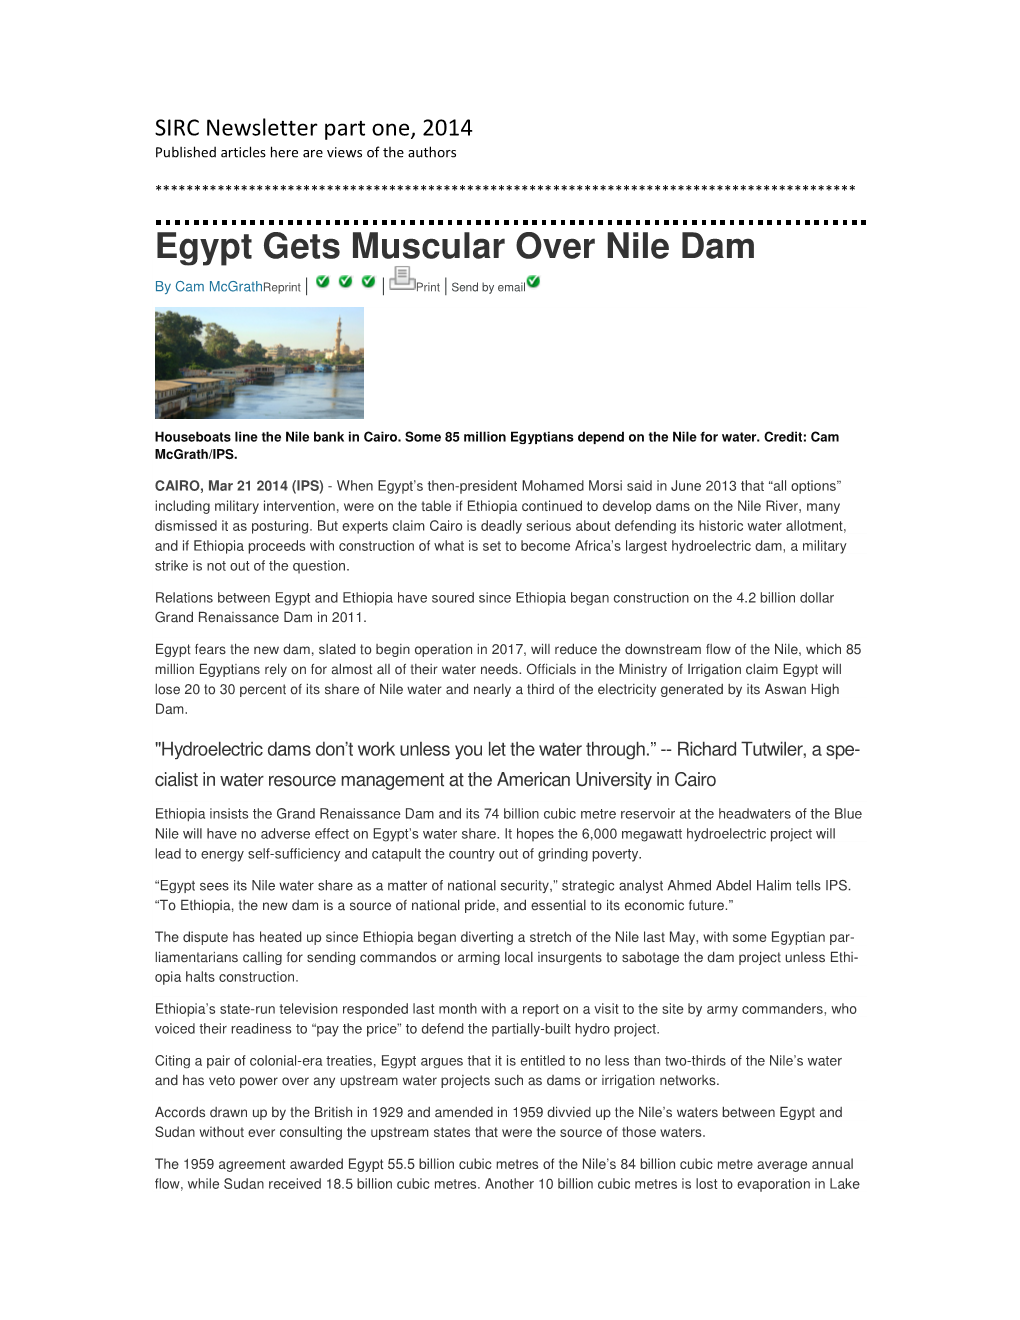 Egypt Gets Muscular Over Nile Dam